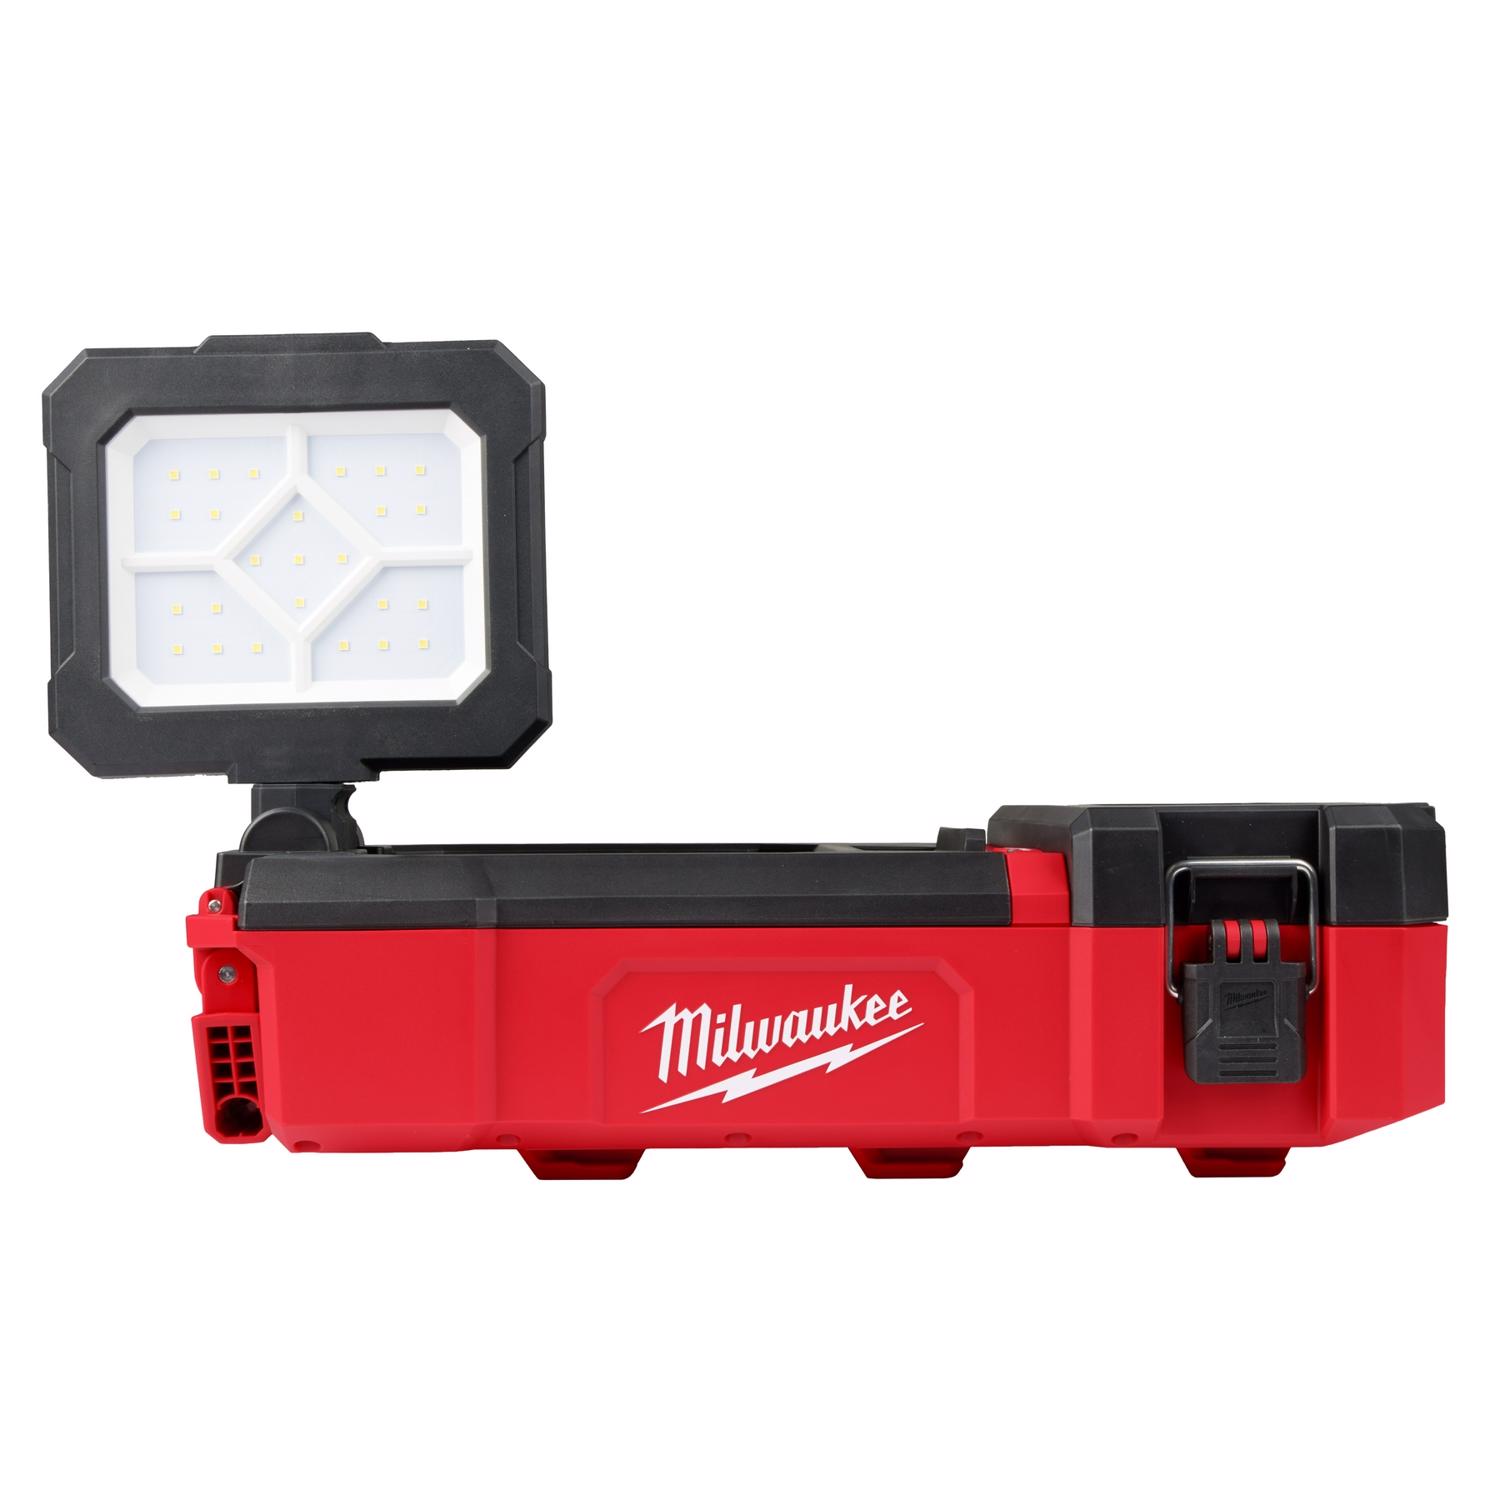 Photos - Torch Milwaukee M12 Packout 1400 lm LED Battery Stand  Flood Light (H or Scissor)